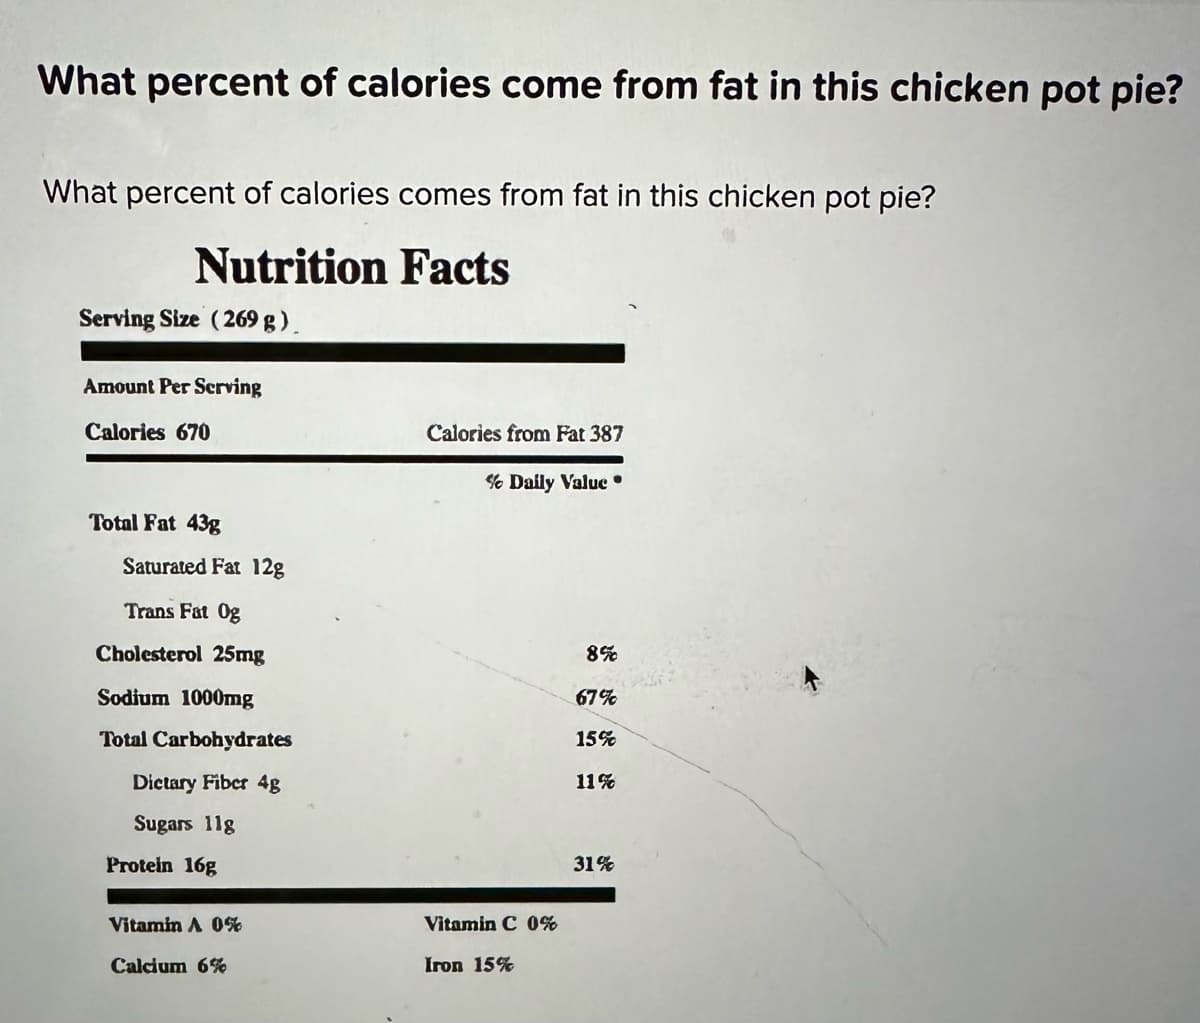 What percent of calories come from fat in this chicken pot pie?
What percent of calories comes from fat in this chicken pot pie?
Nutrition Facts
Serving Size (269 g).
Amount Per Serving
Calories 670
Calories from Fat 387
% Daily Value *
Total Fat 43g
Saturated Fat 12g
Trans Fat 0g
Cholesterol 25mg
8%
Sodium 1000mg
67%
Total Carbohydrates
15%
Dietary Fiber 4g
11%
Sugars 11g
Protein 16g
Vitamin A 0%
Calcium 6%
Vitamin C 0%
Iron 15%
31%